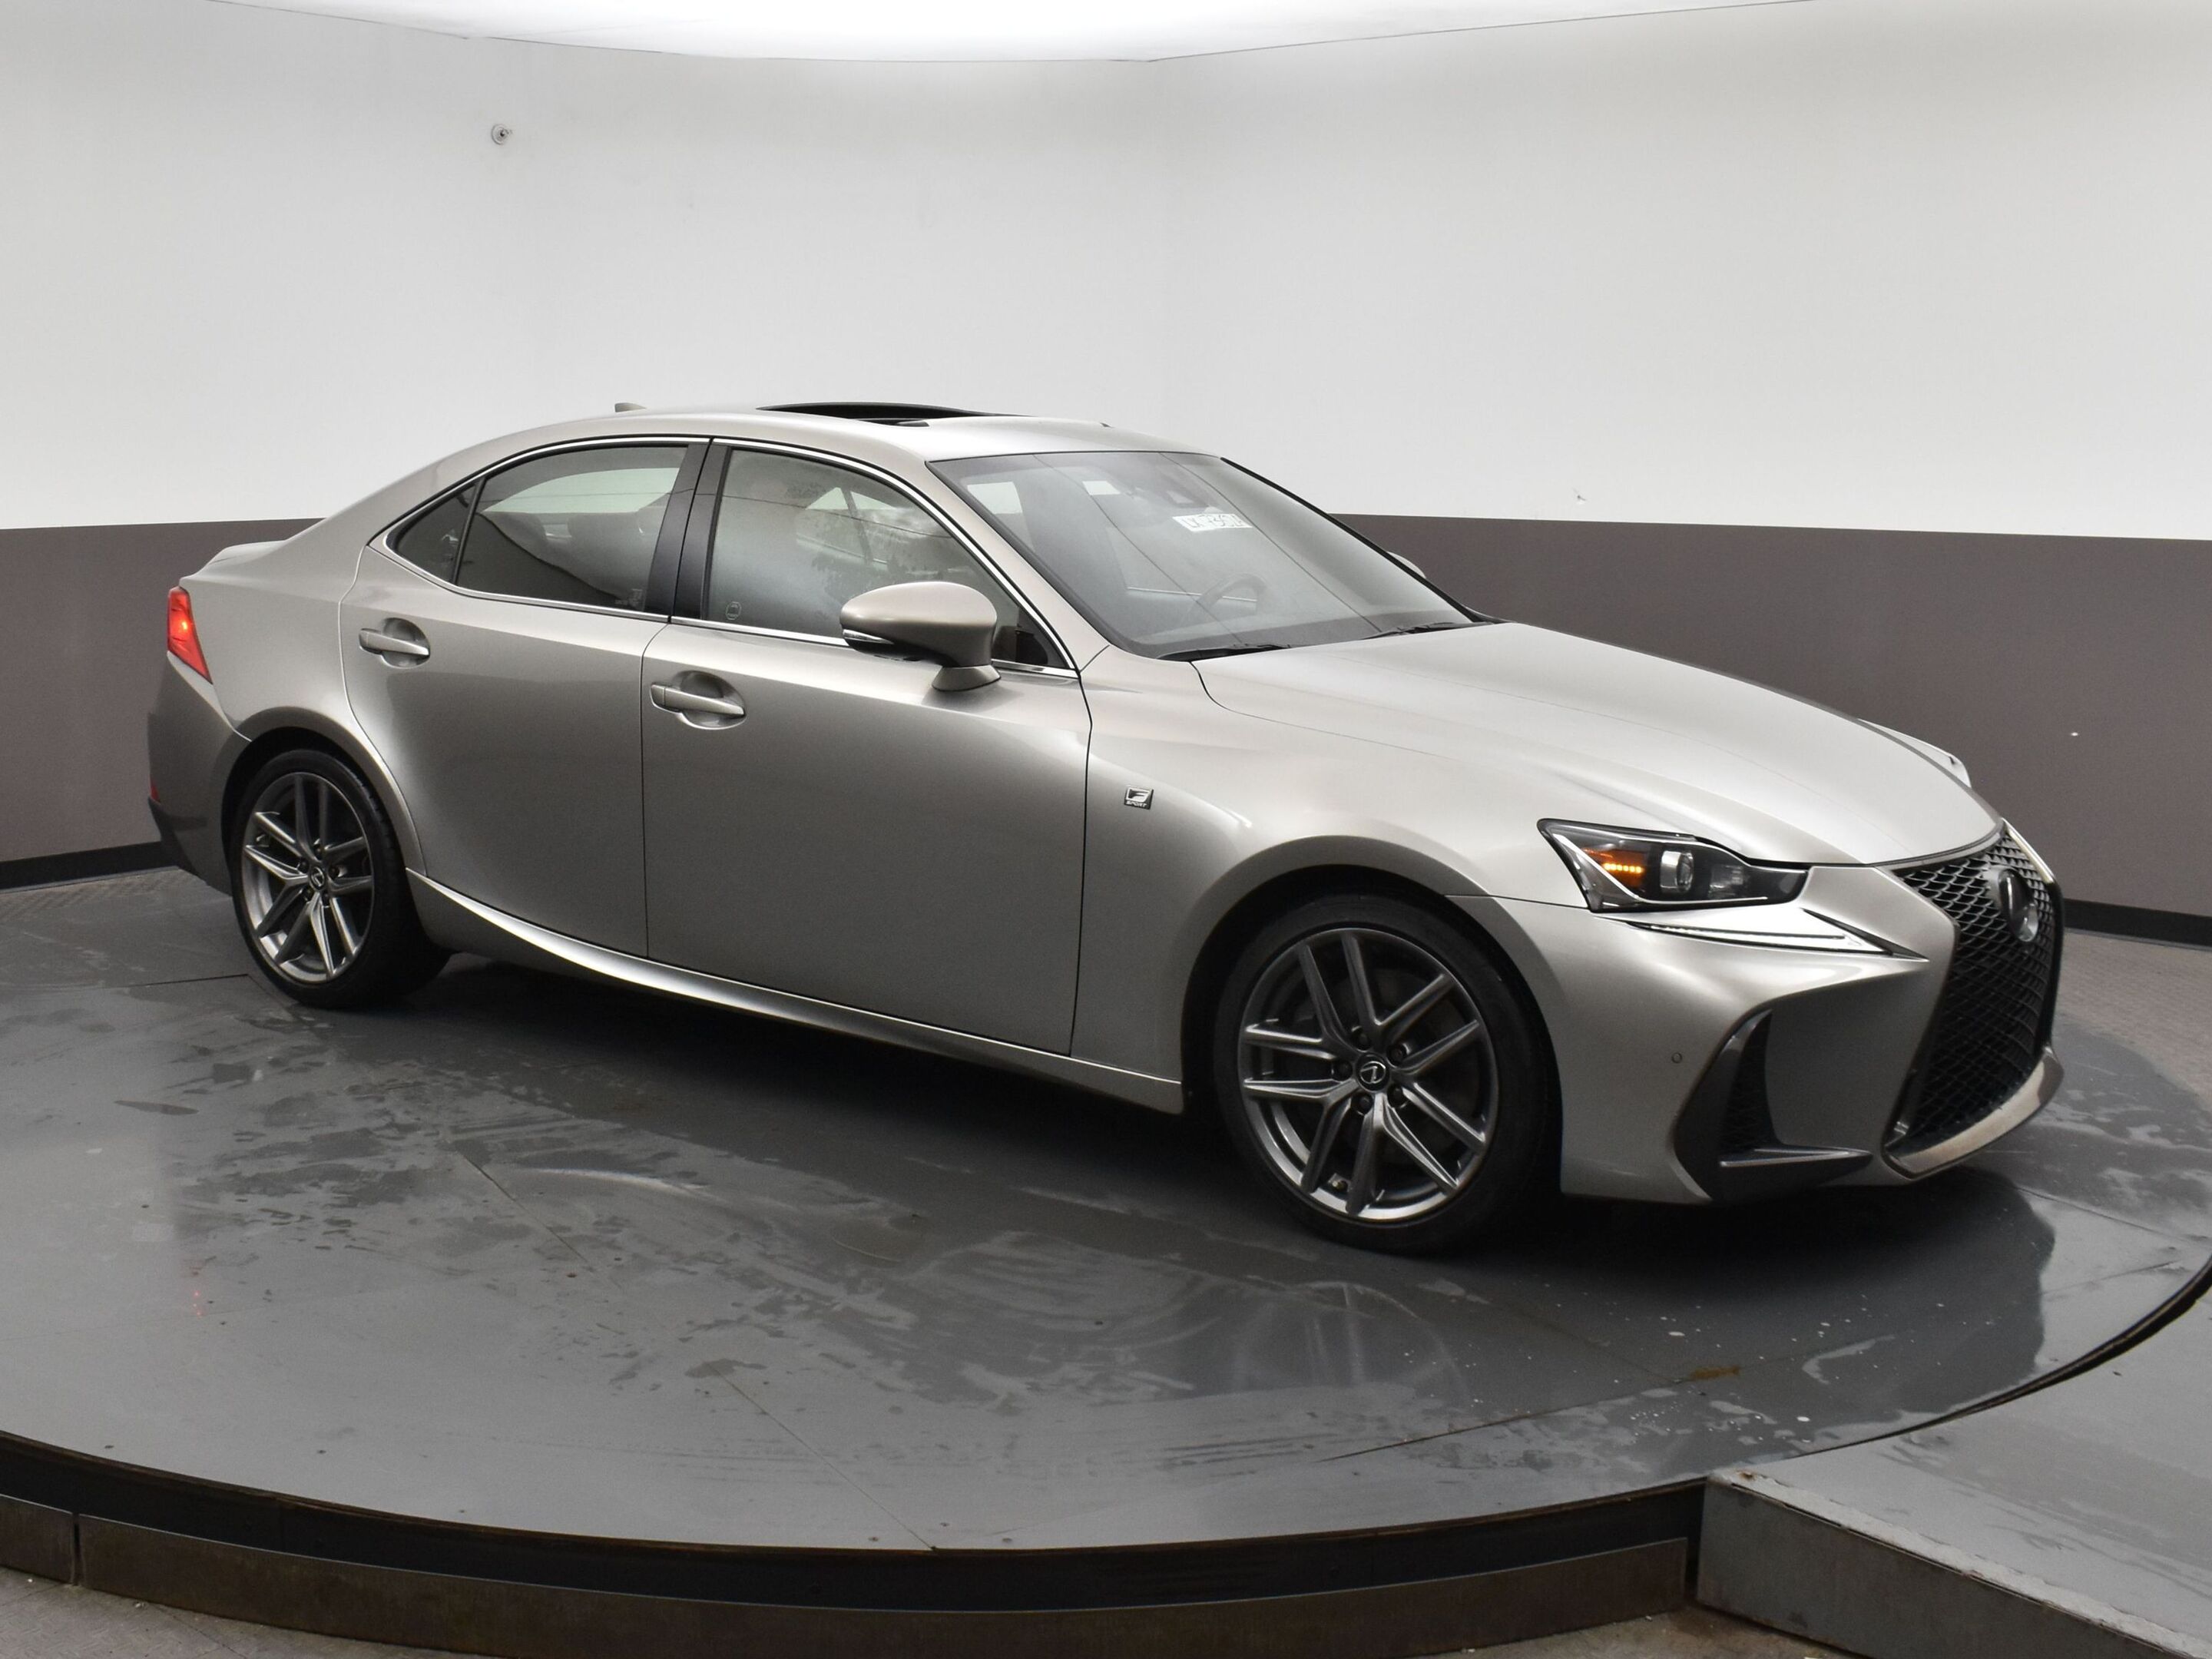 2019 Lexus IS 350 F SPORT 2 AWD ONE OWNER W/ LEATHER, NAV, SUNROOF, 